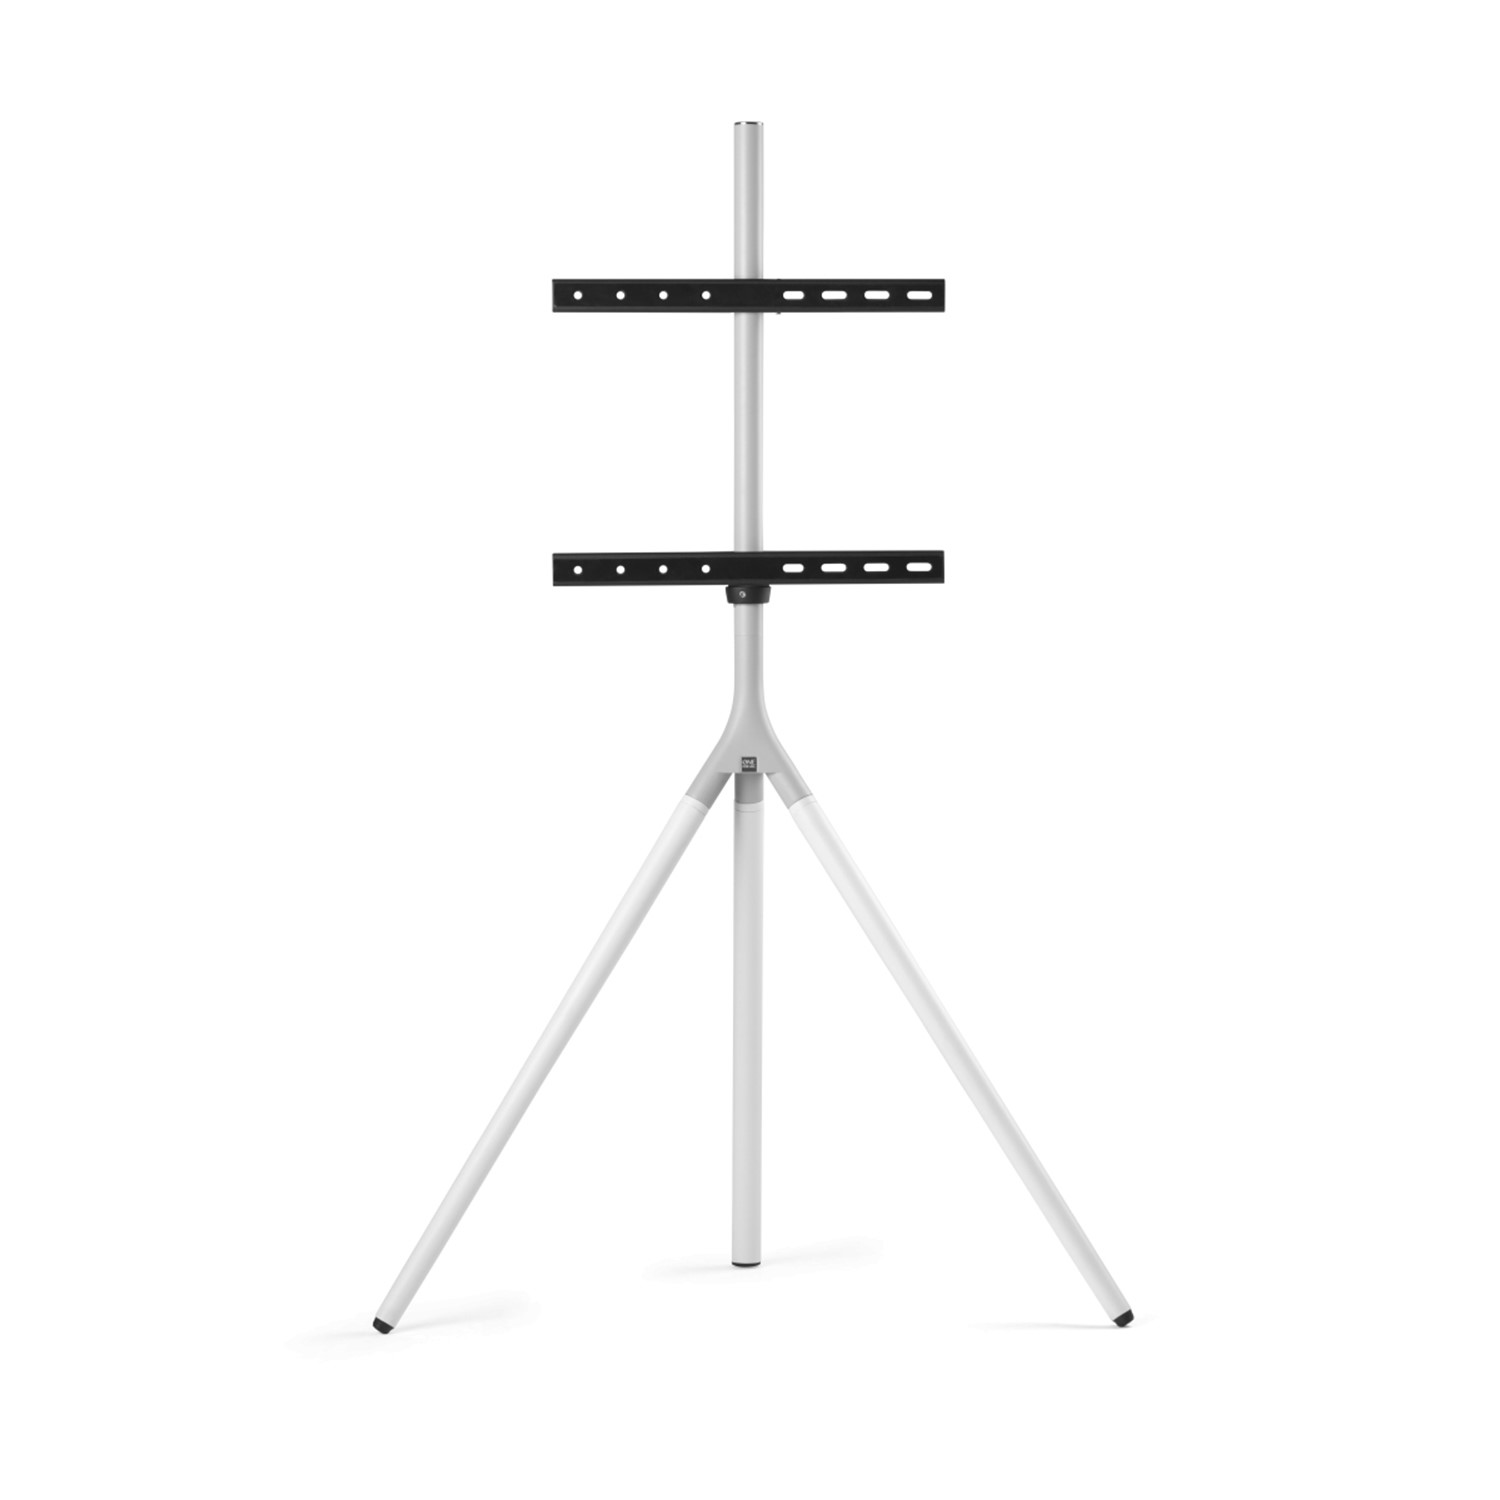 Photo of Full metal tripod arctic white tv stand for screen size 32-65 inch